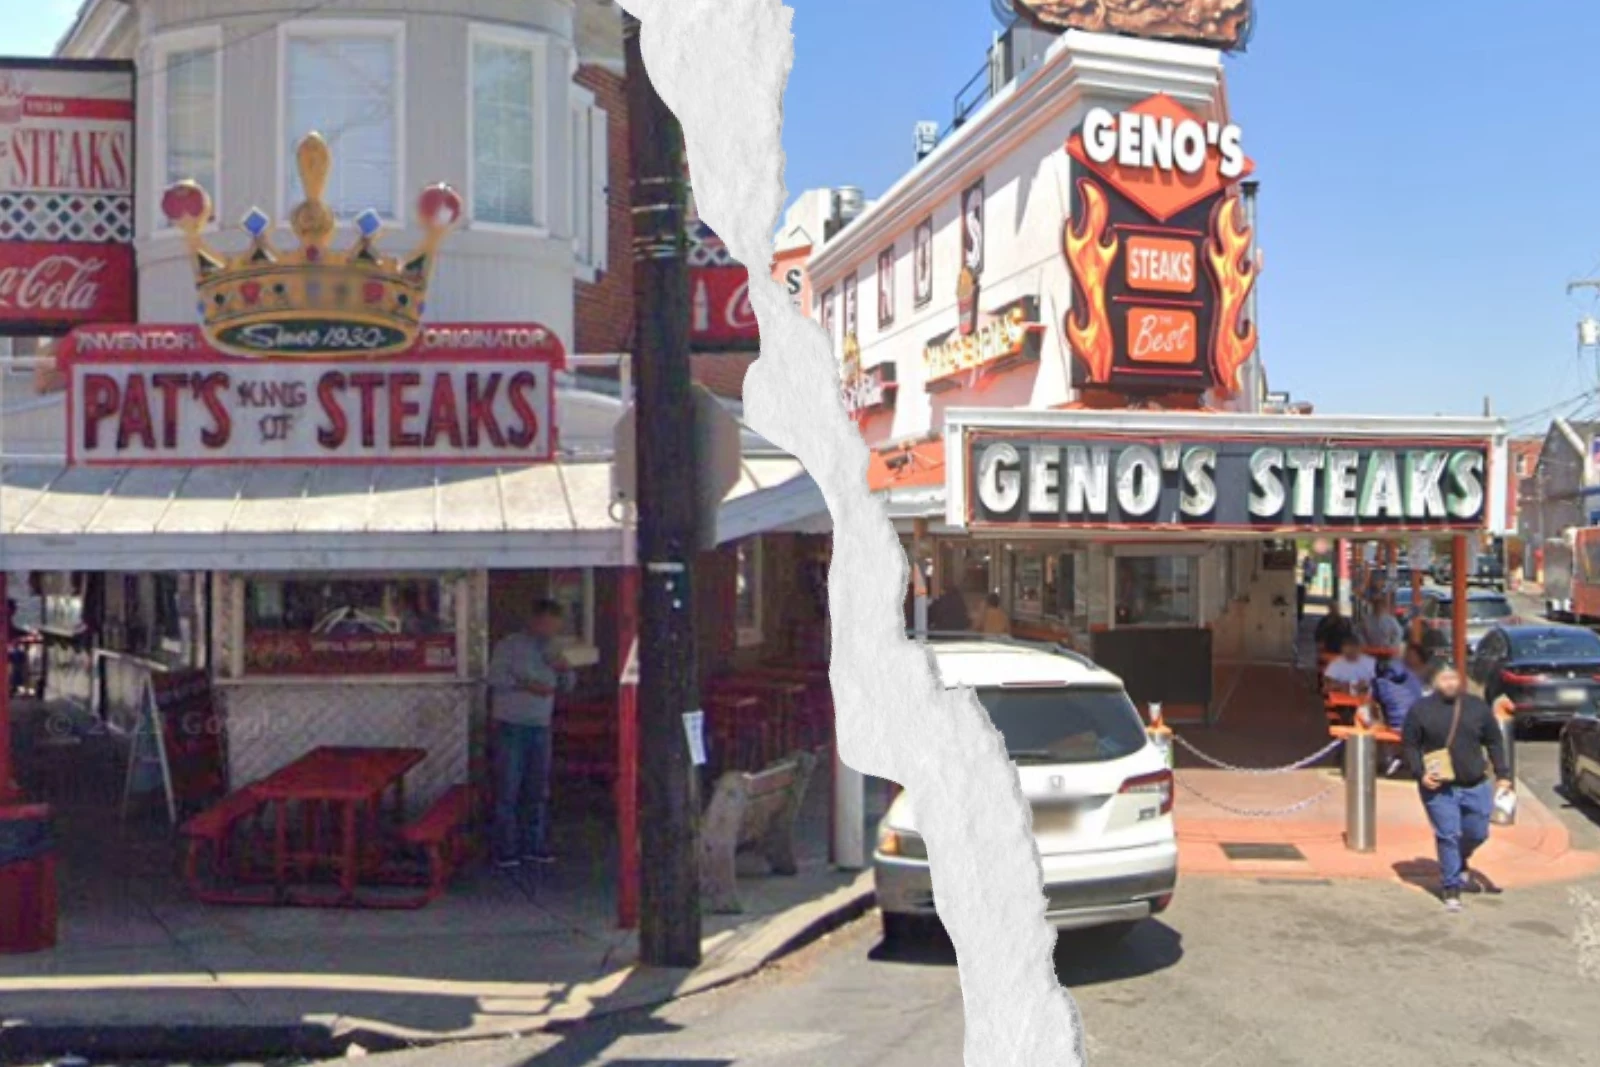 Pat's and Geno's Steaks in Philadelphia PA - Photos: Google Maps/Canva